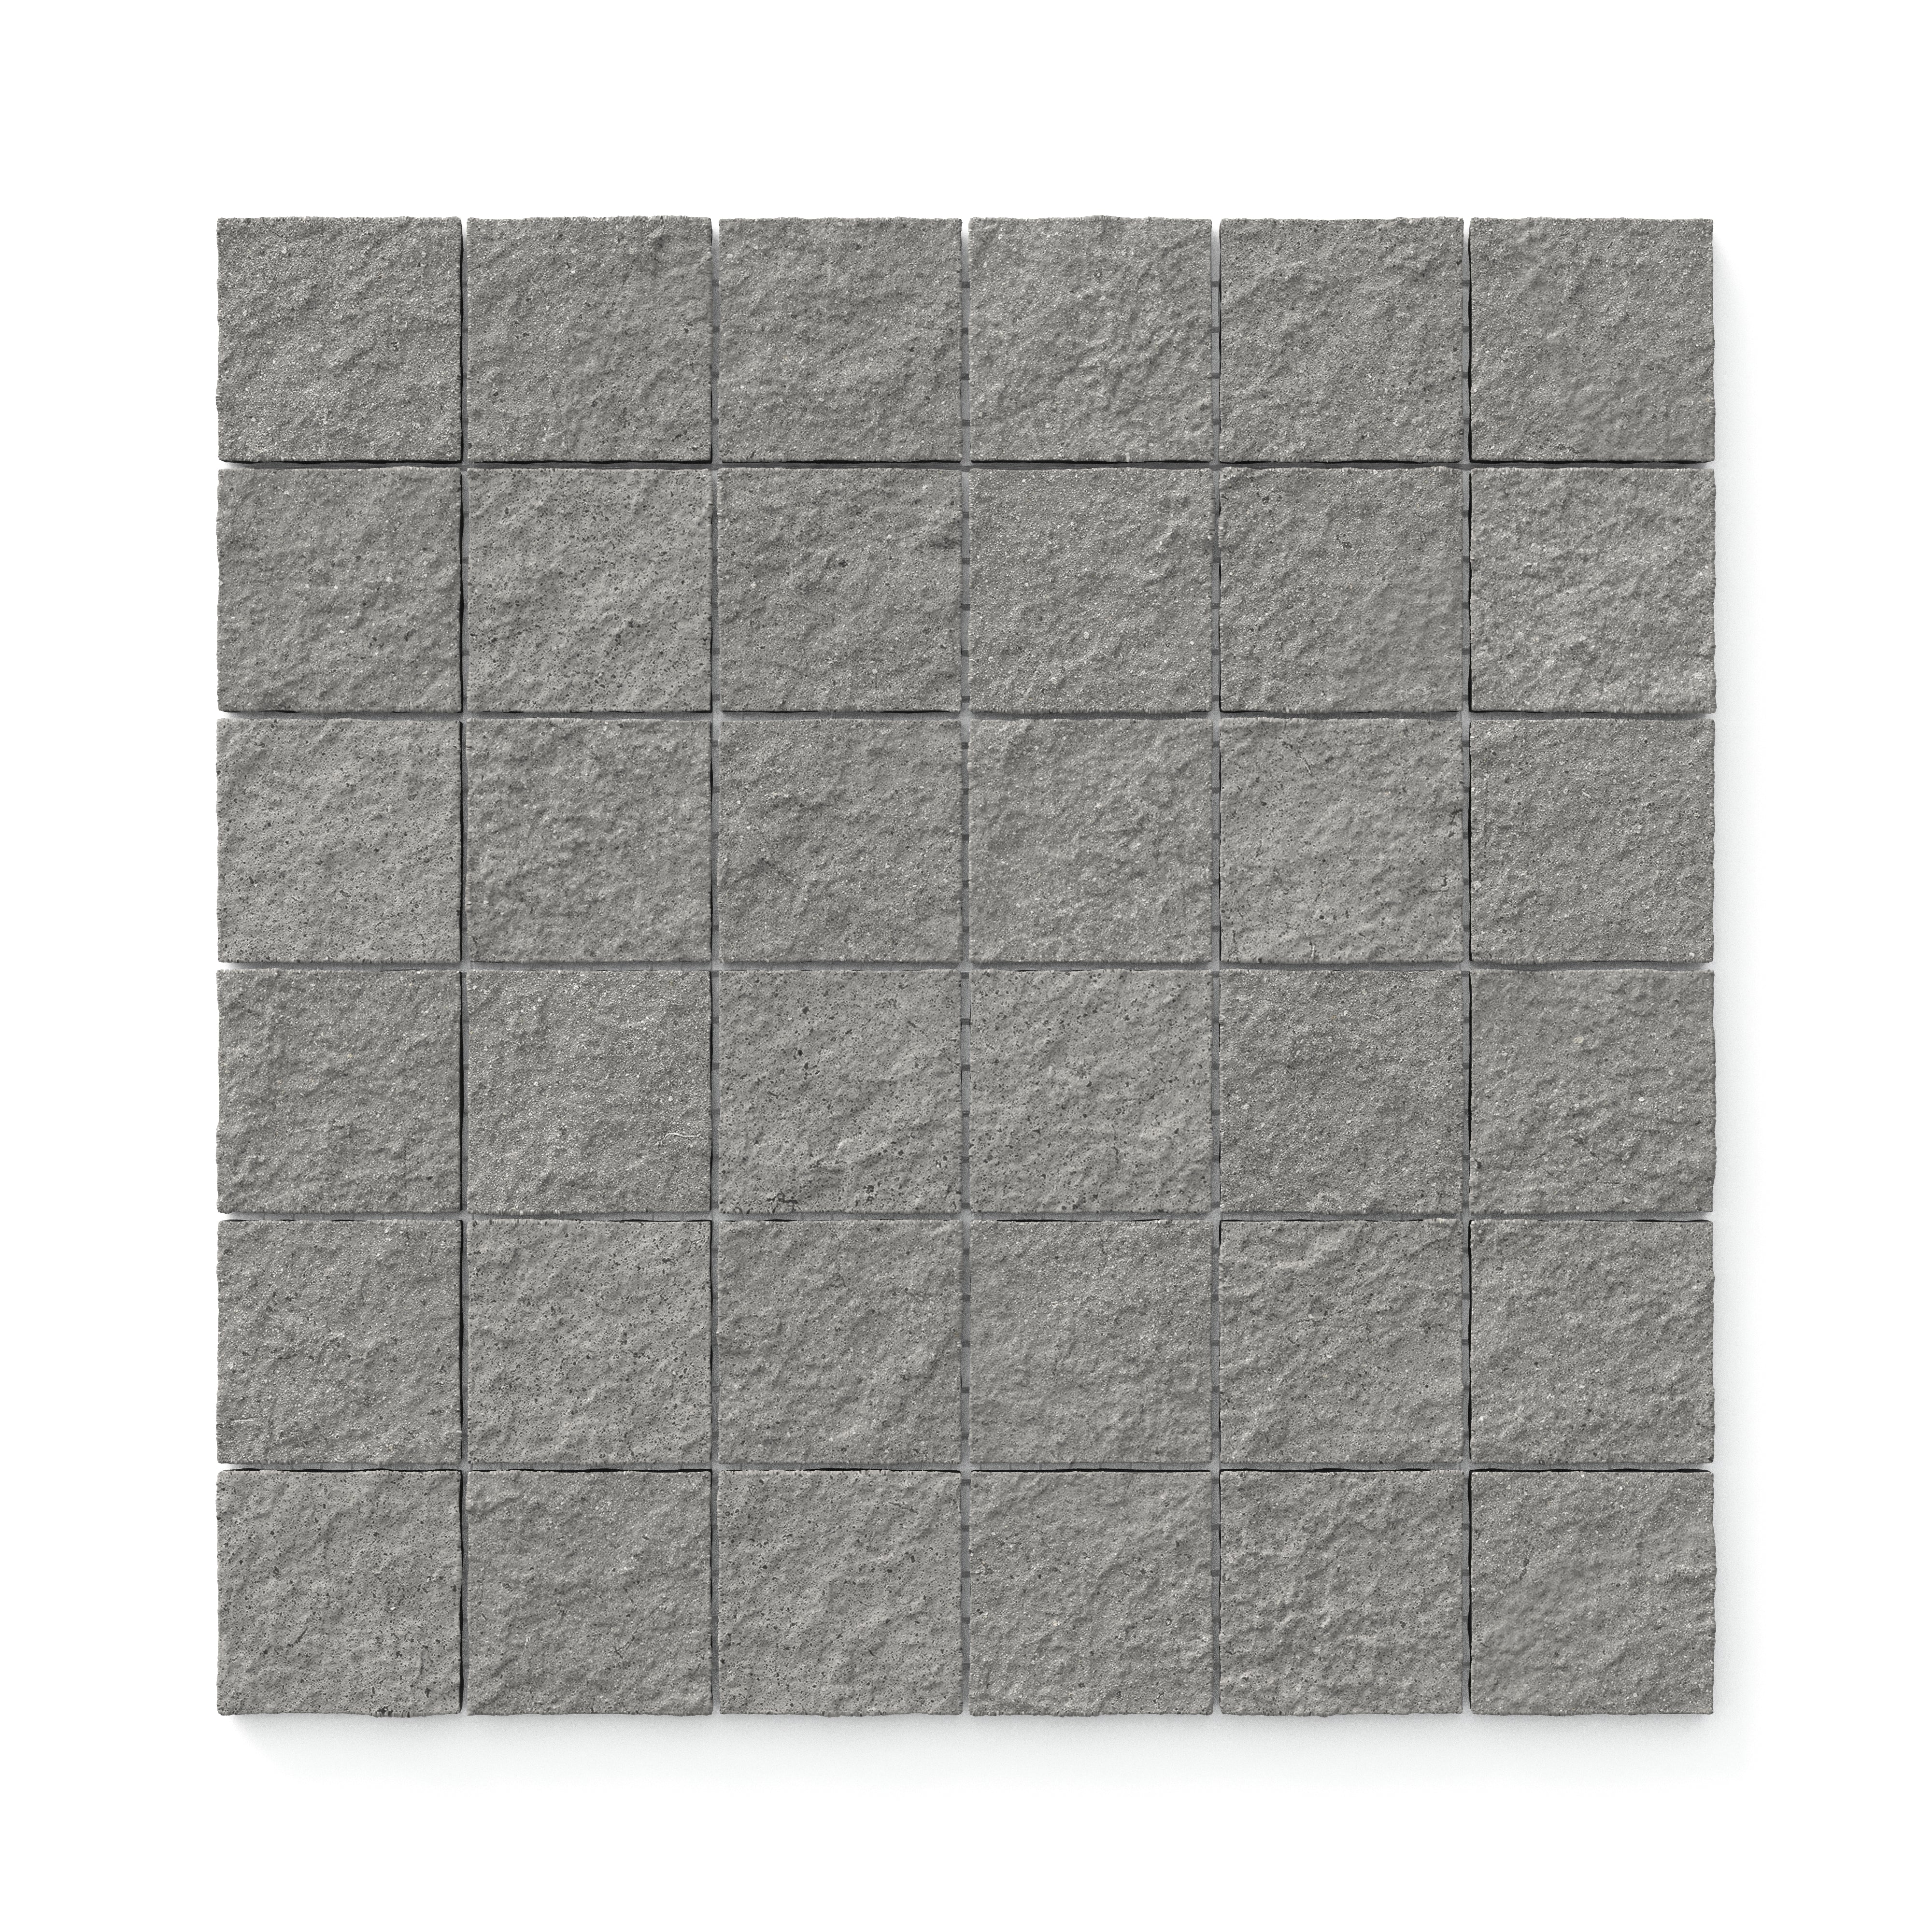 Palmer 2x2 Raw Porcelain Mosaic Tile in Charcoal